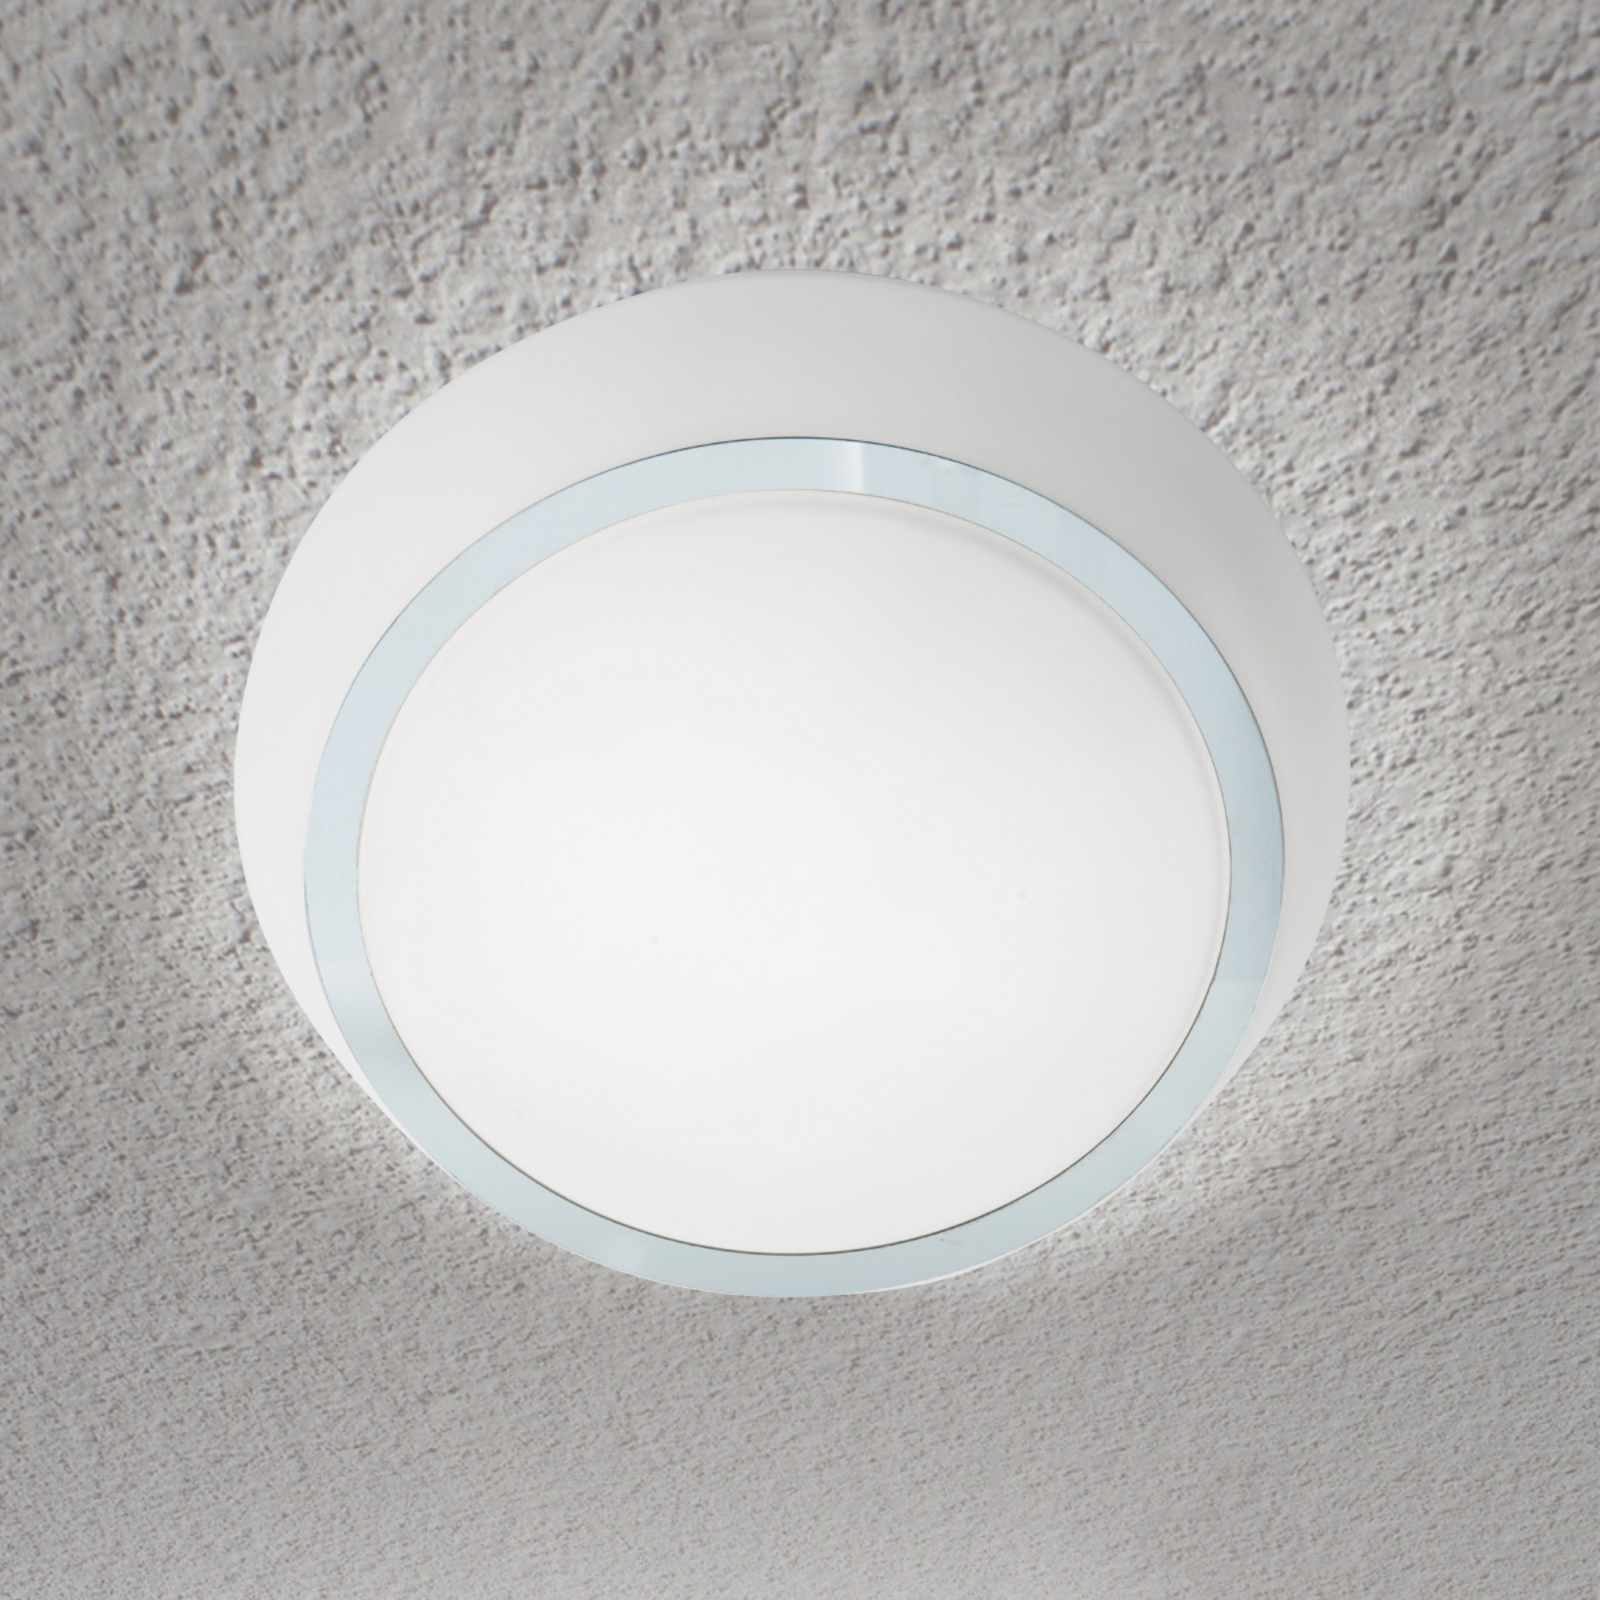 Glas ceiling light Pia with IP44, 30 cm